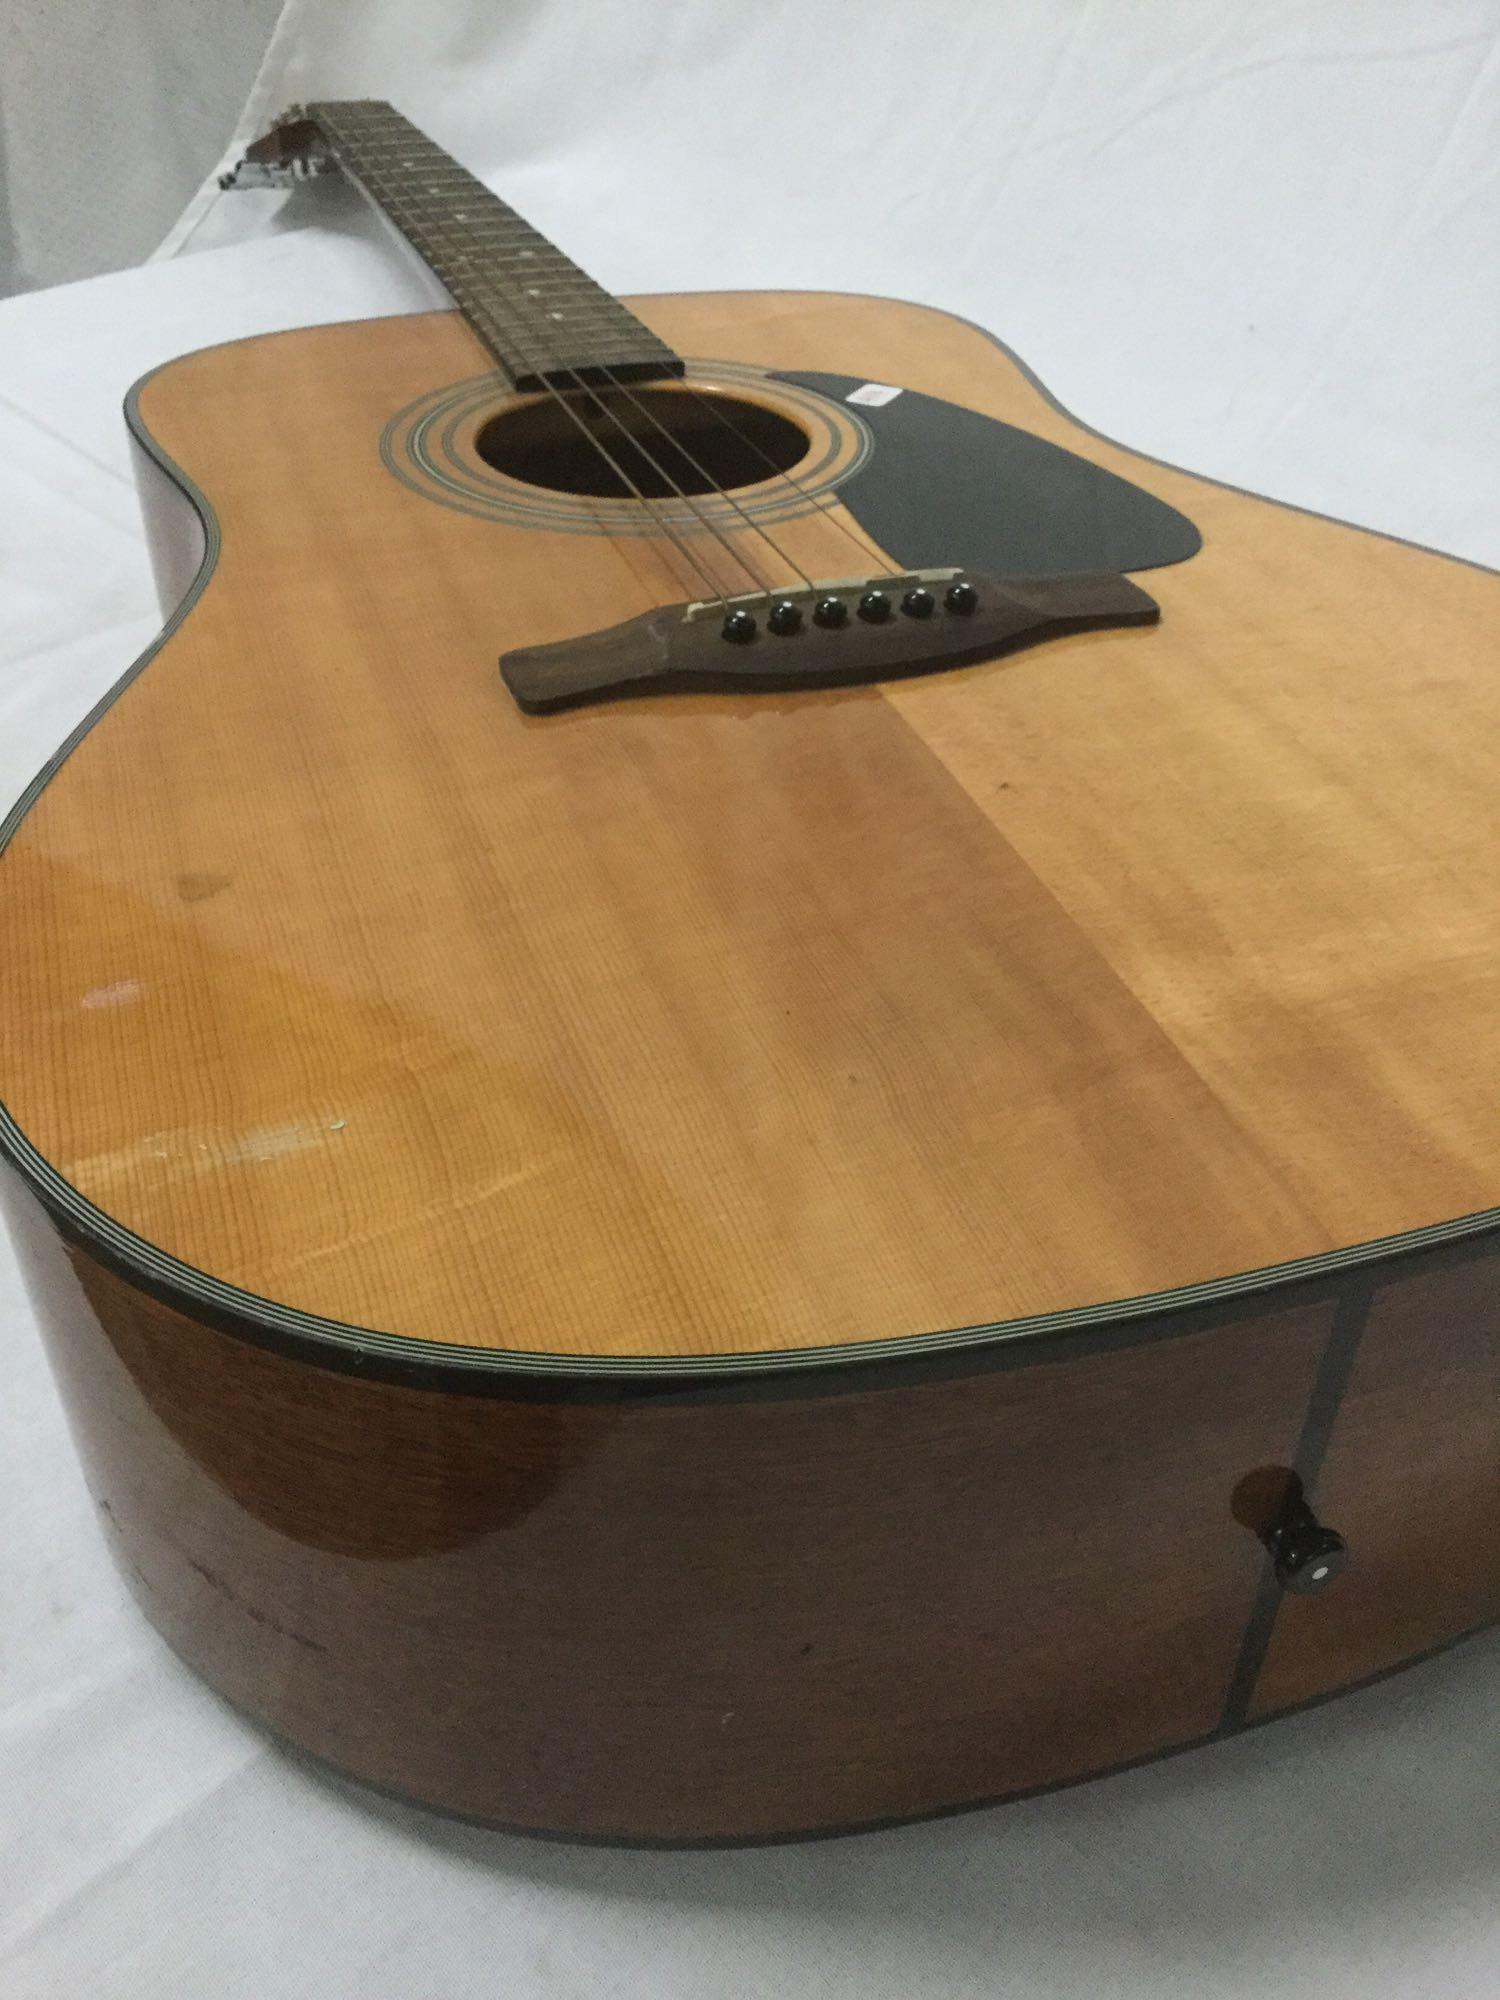 Fender acoustic 6-string guitar - needs to be restrung